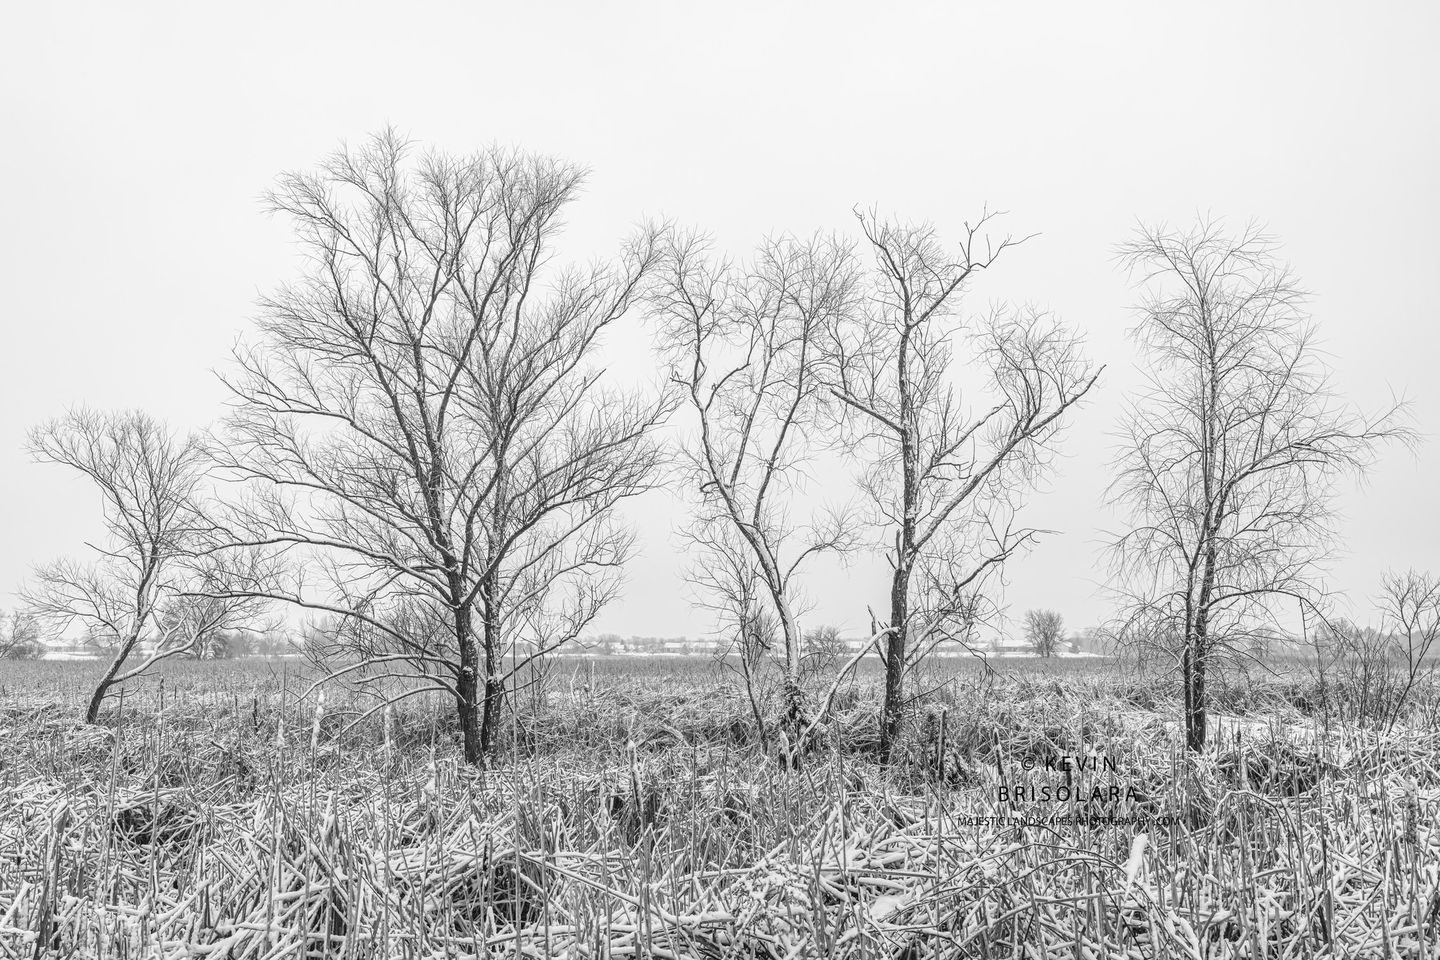 A WINTER SCENE FROM THE PRAIRIE